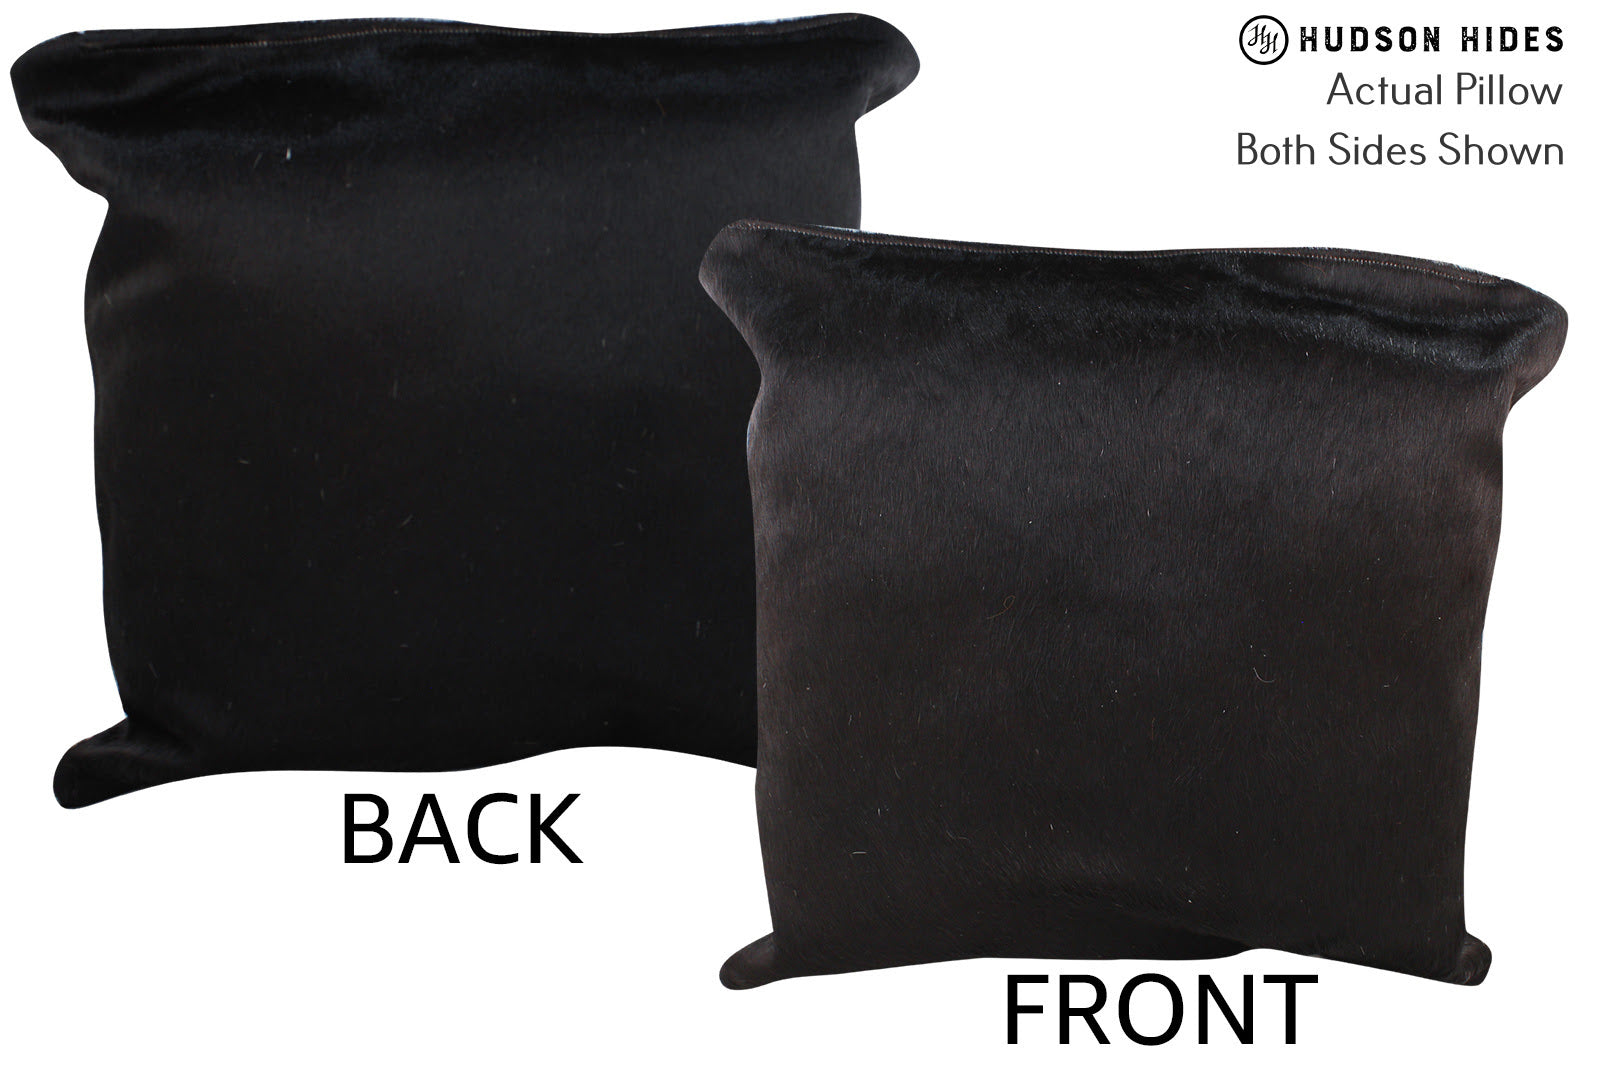 Solid Black Cowhide Pillow #76550